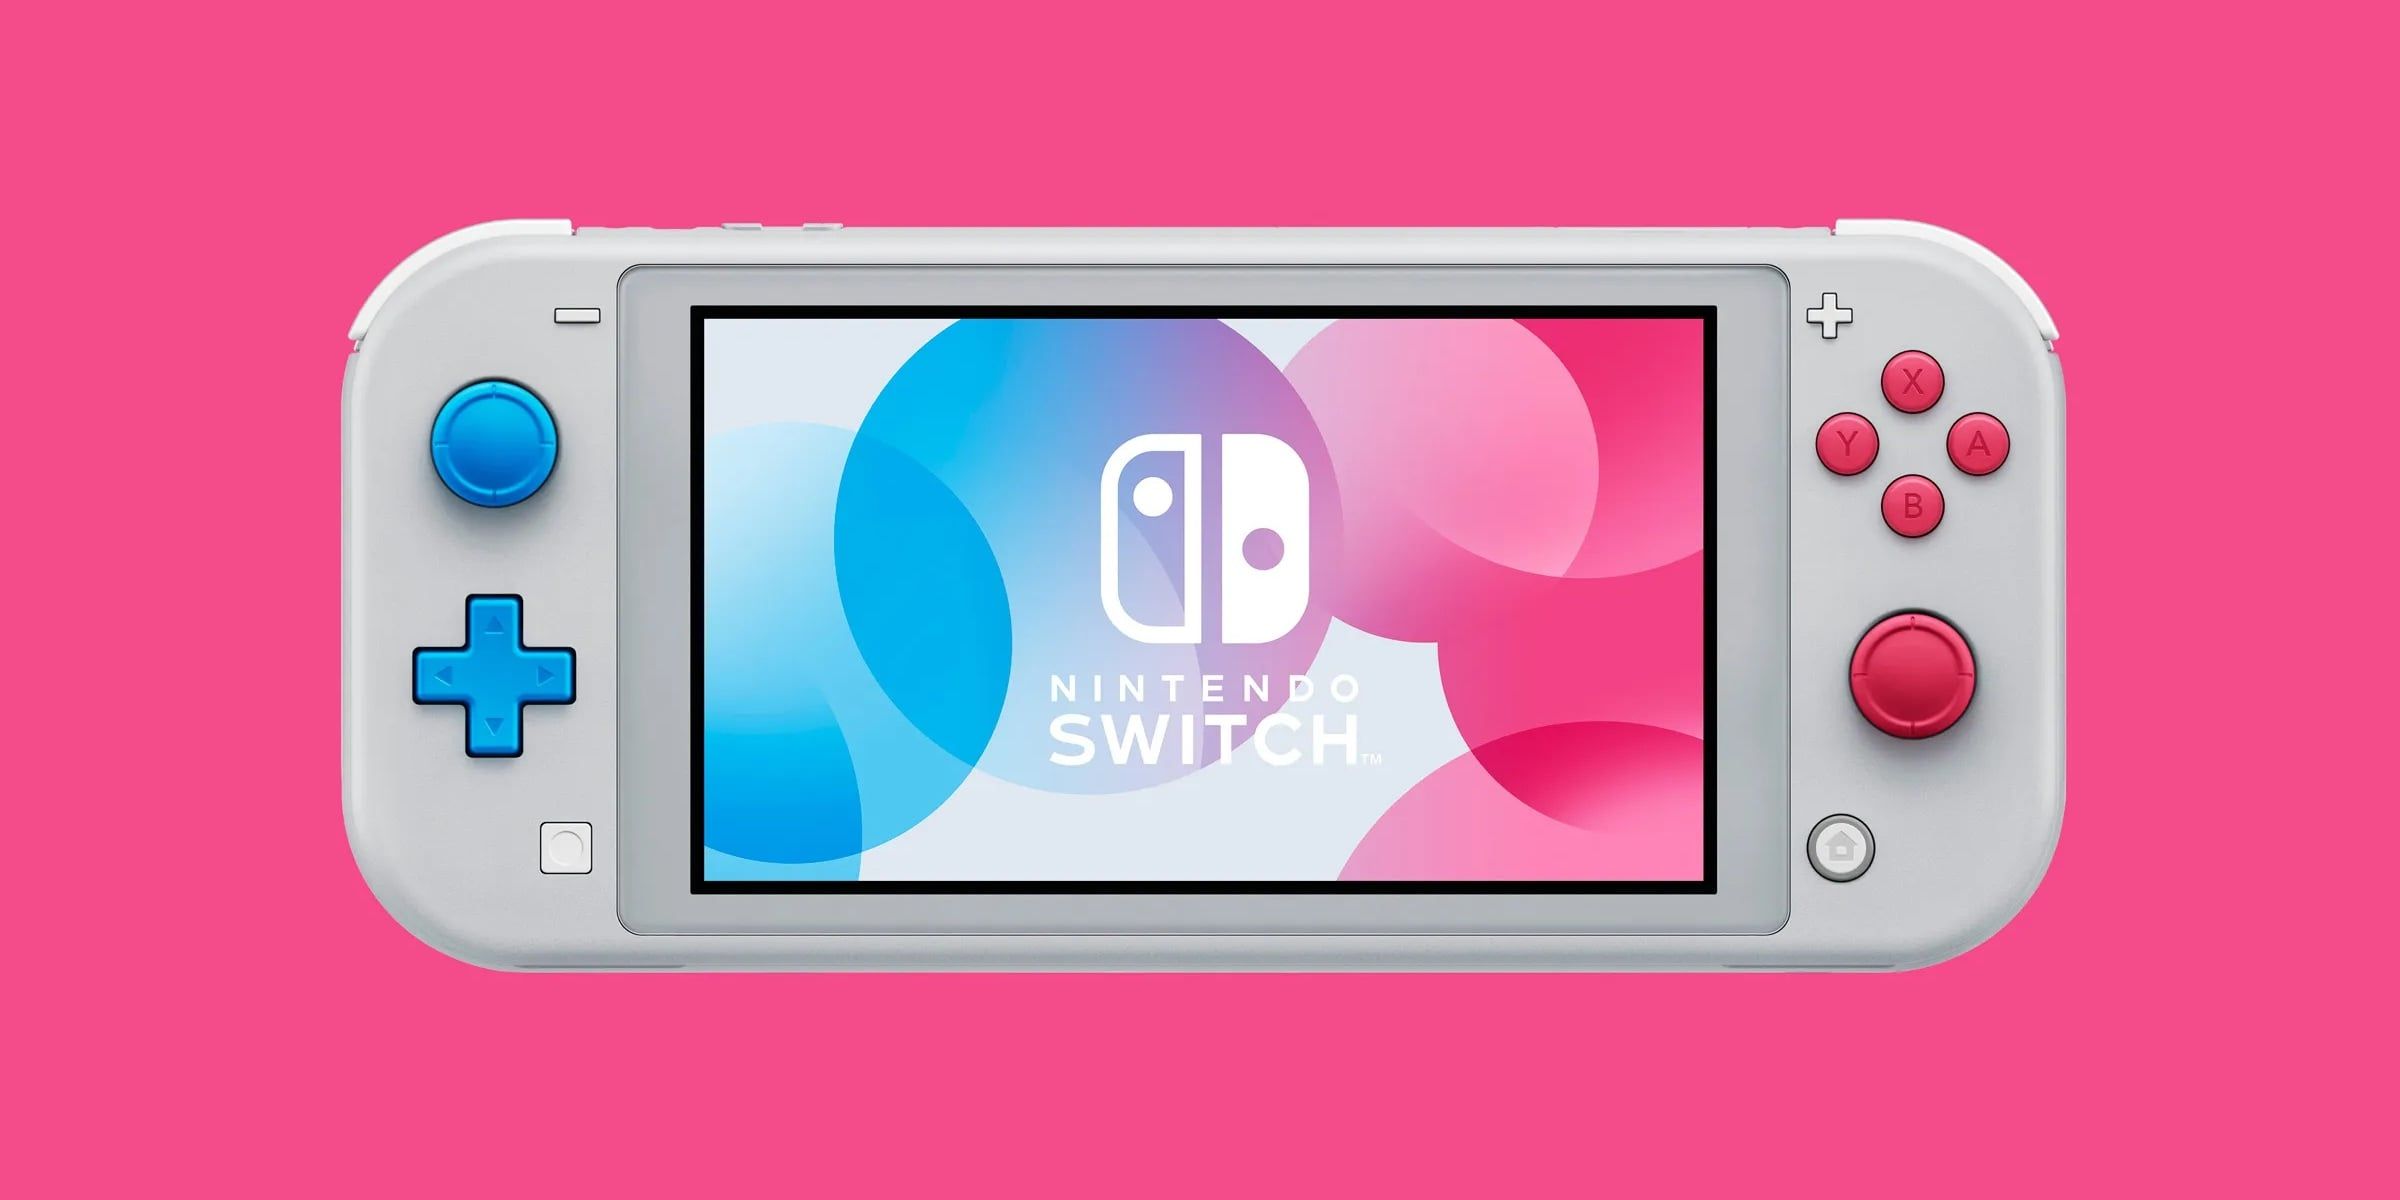 Nintendo switch console sits on a pink background